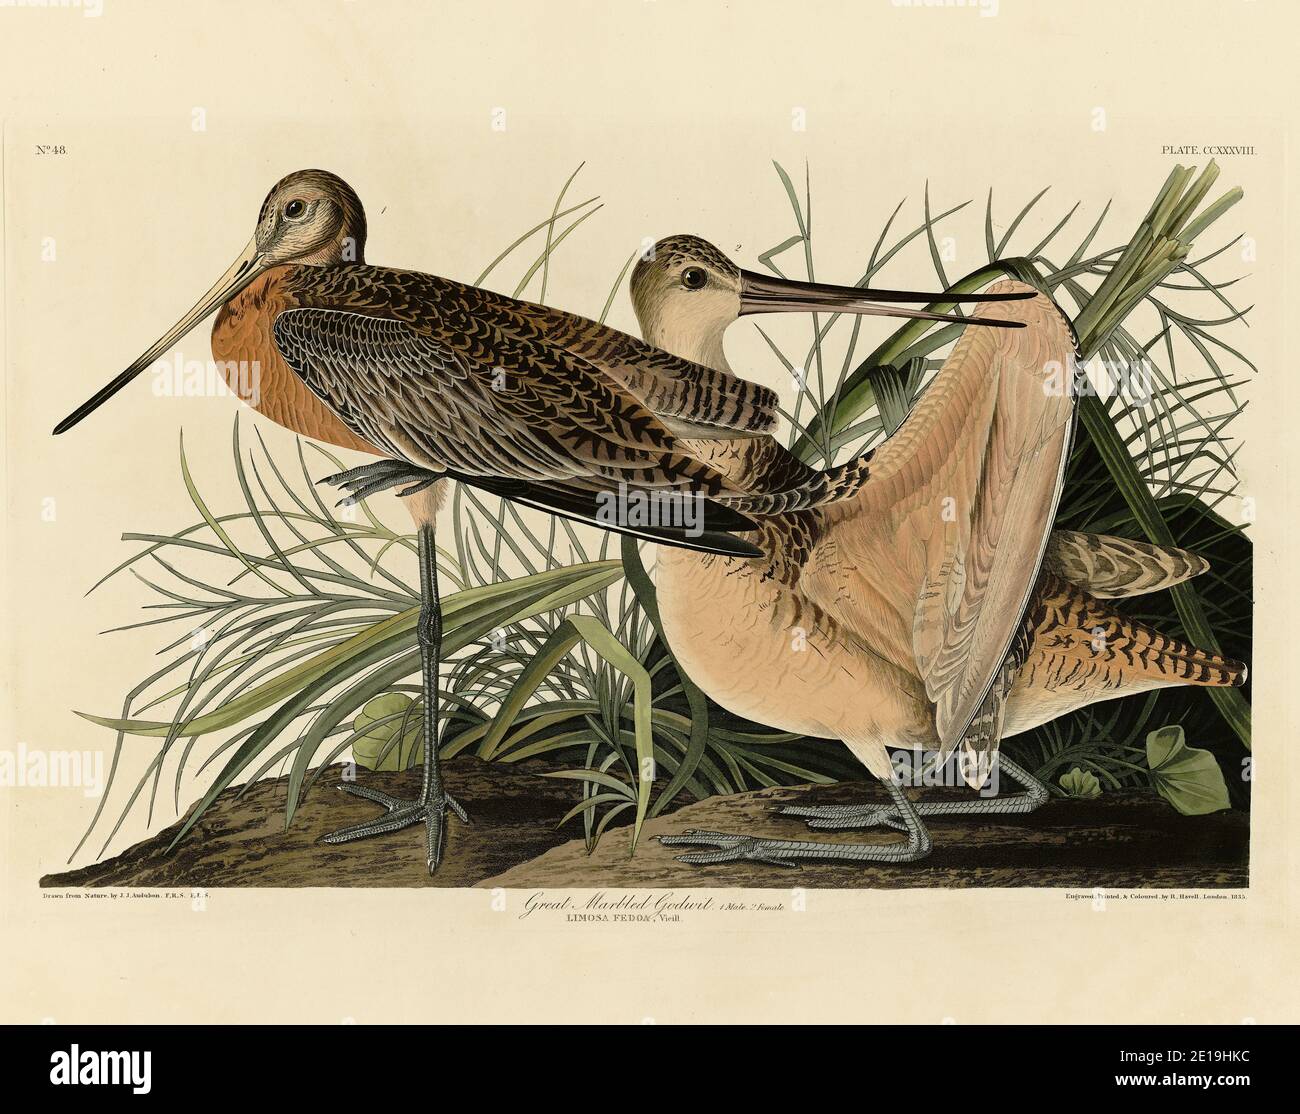 Plate 238 Great Marbled Godwit, from The Birds of America folio (1827–1839) by John James Audubon - Very high resolution and quality edited image Stock Photo